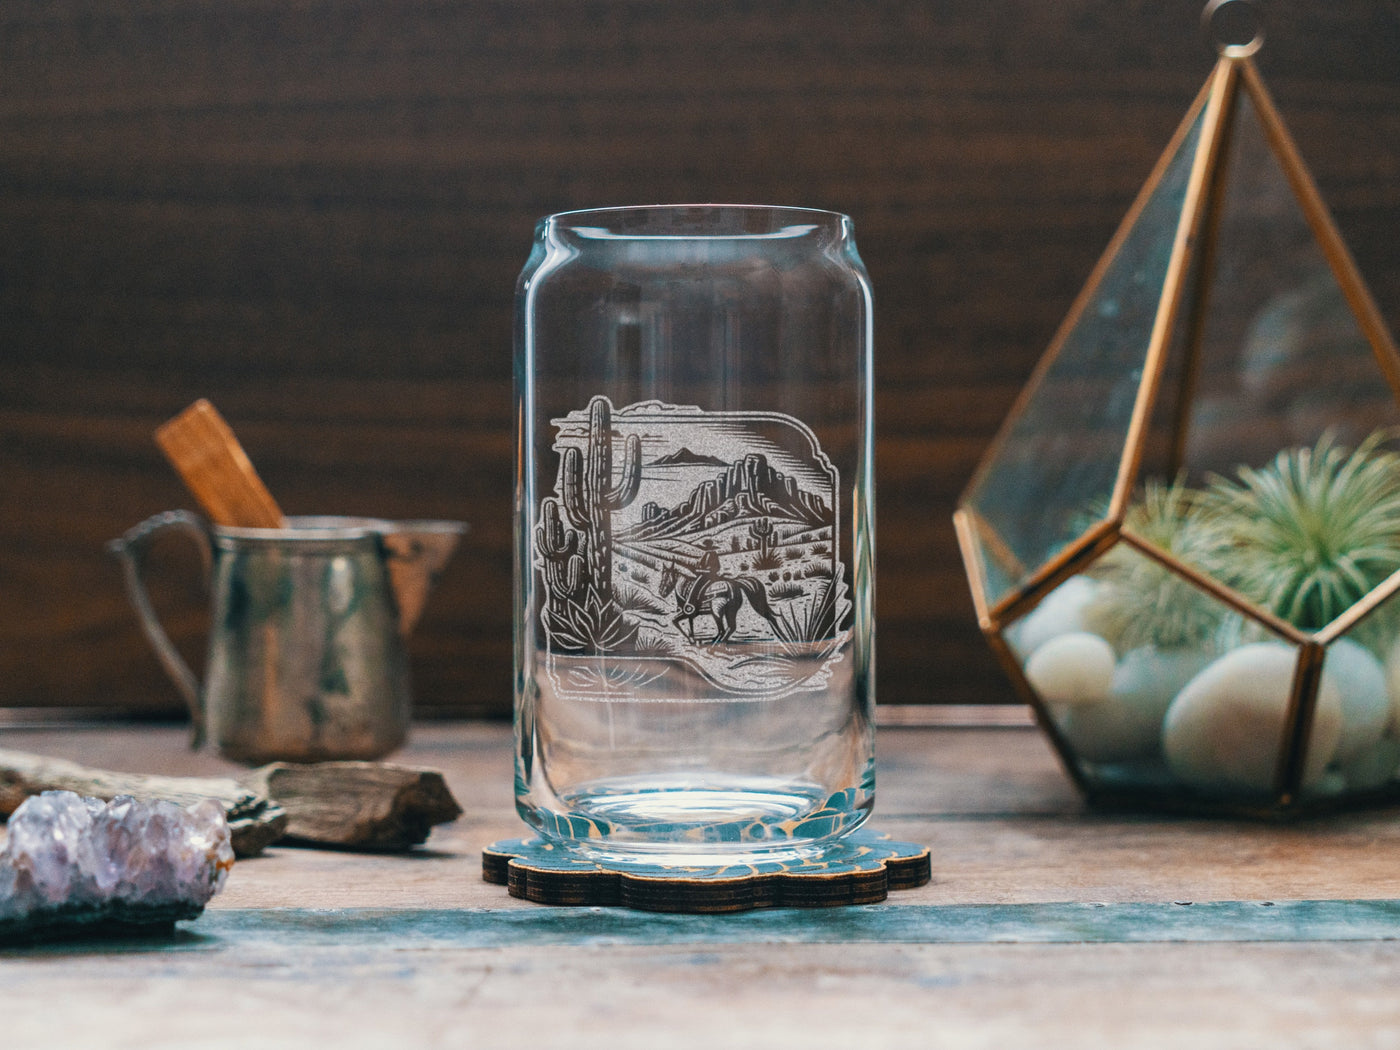 Riding Cowboy Scene Glasses | Personalized etched glassware for beer, whiskey, wine & cocktails. Western Desert Scene, Southwestern Decor.